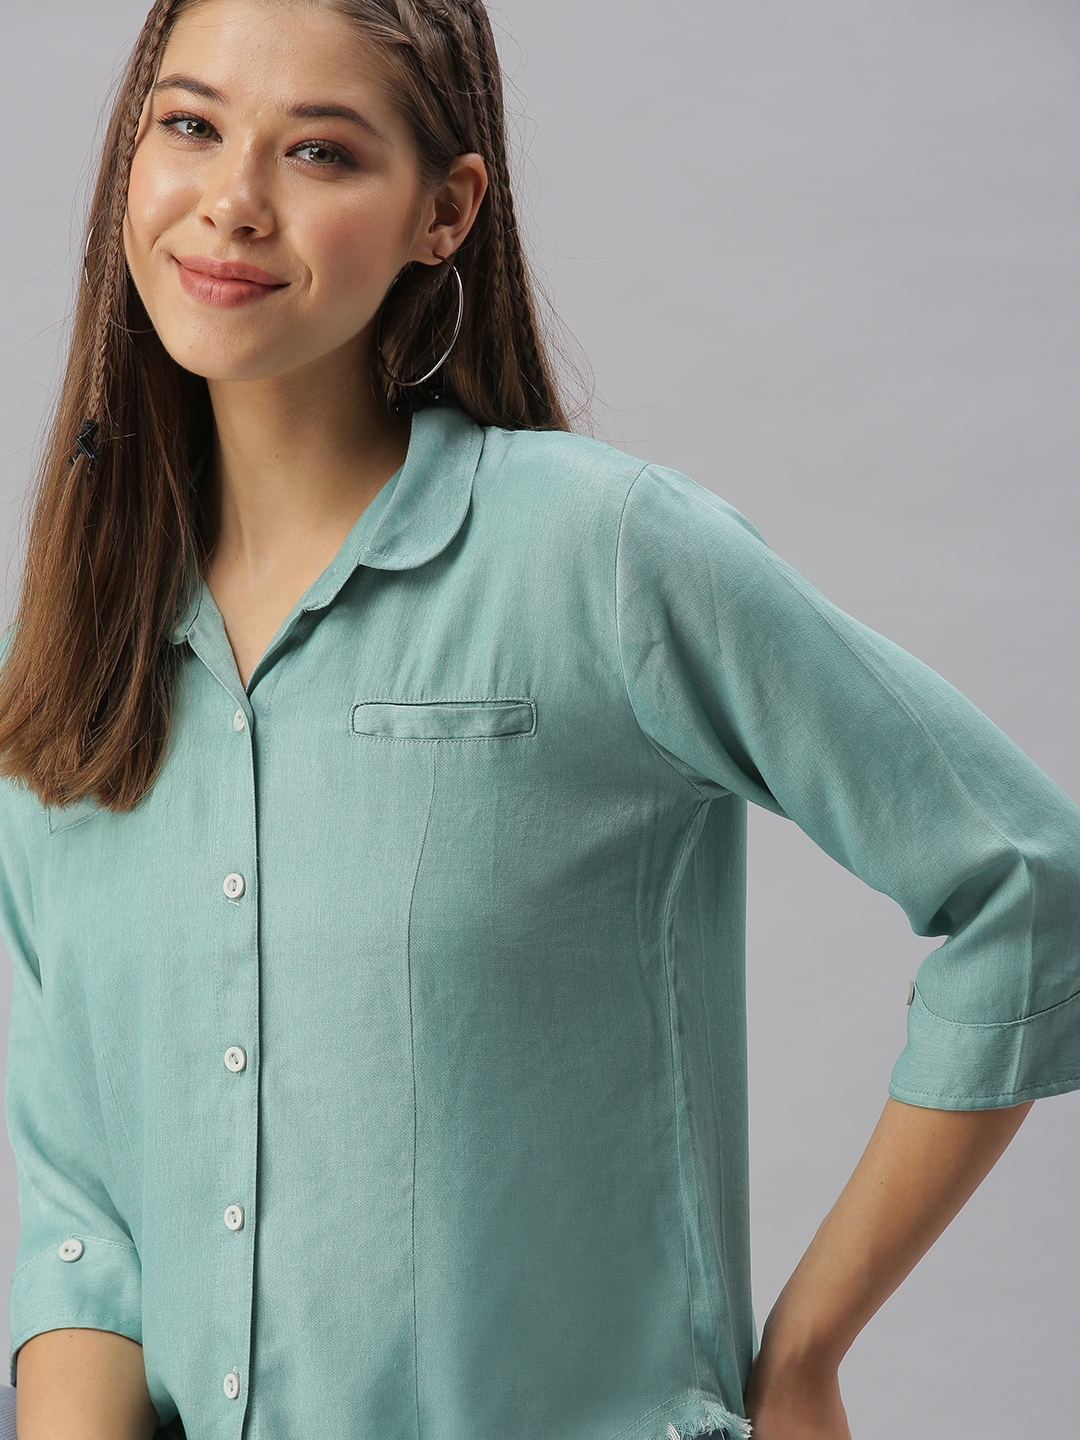 Women's Green Polycotton Solid Casual Shirts